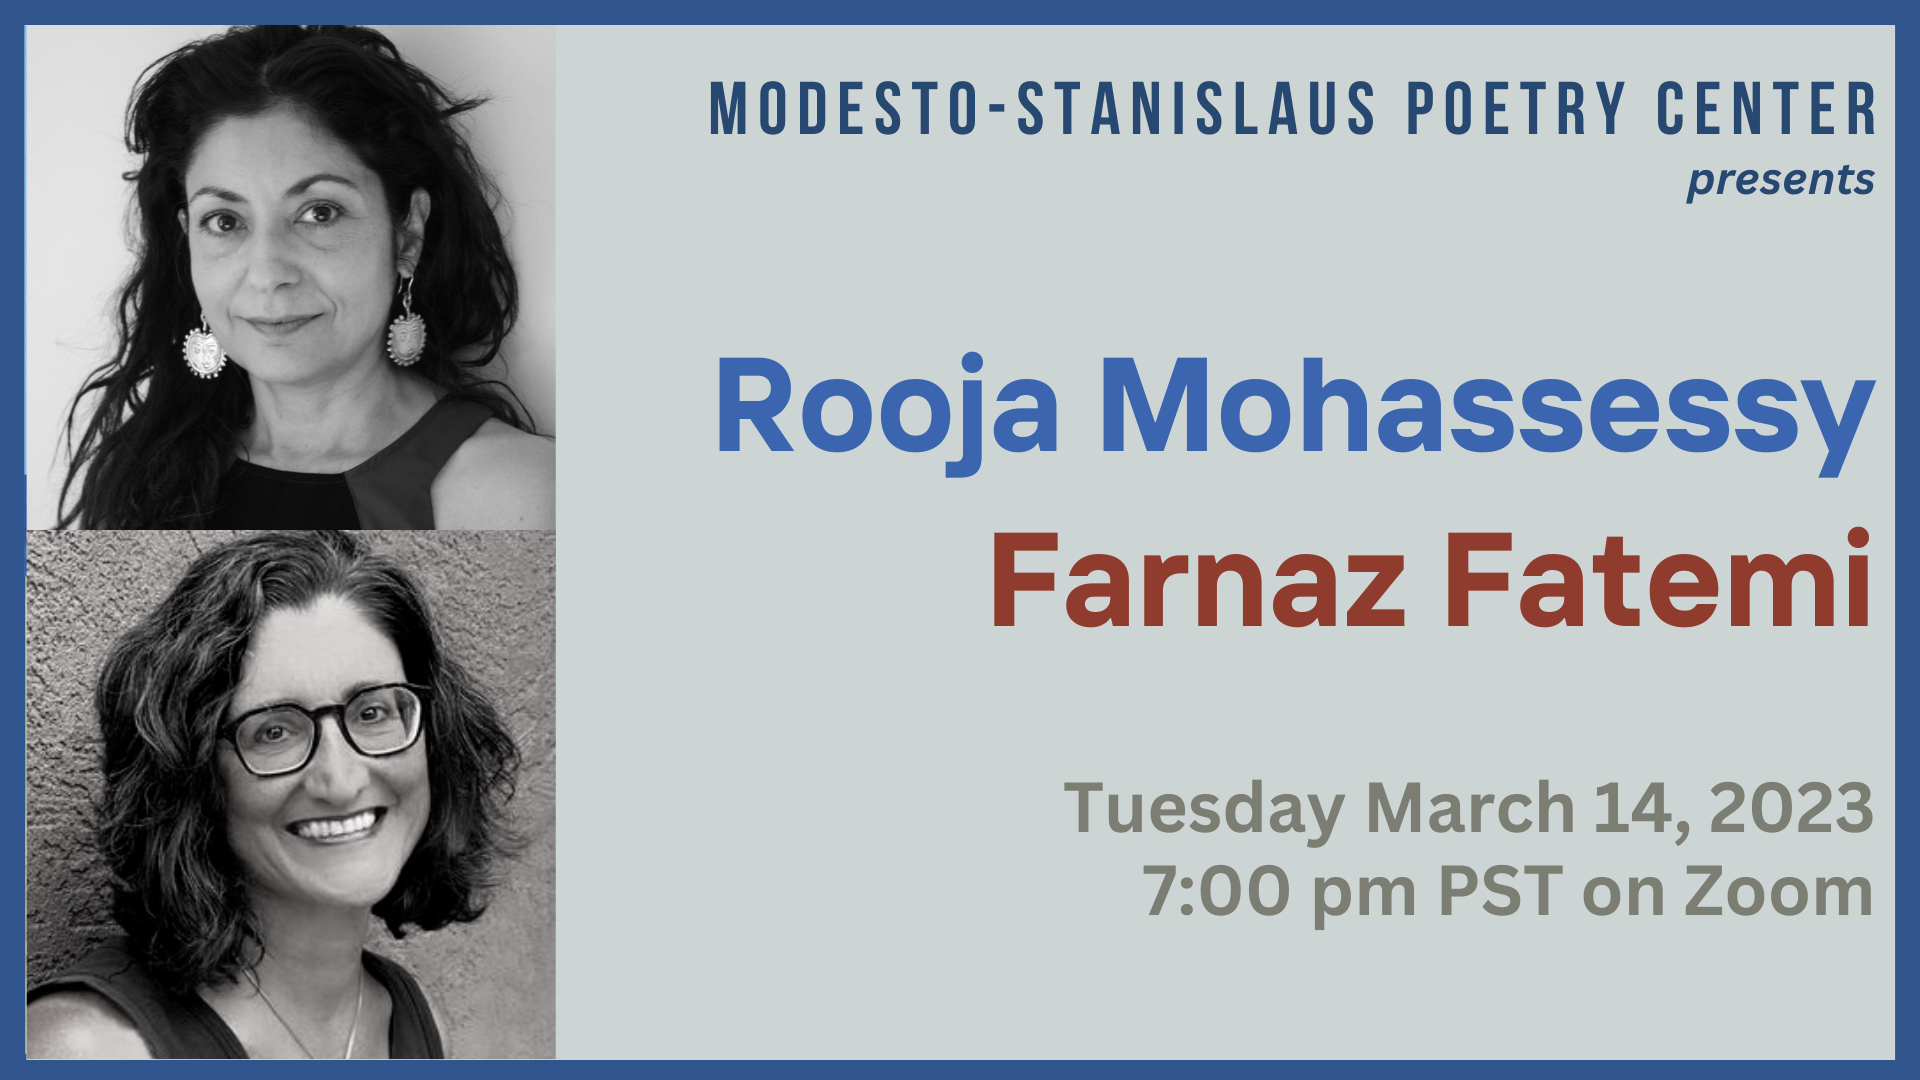 Rooja Mohassessey and Farnaz Fatemi featured poets on Tues Mar 14 at 7 pm